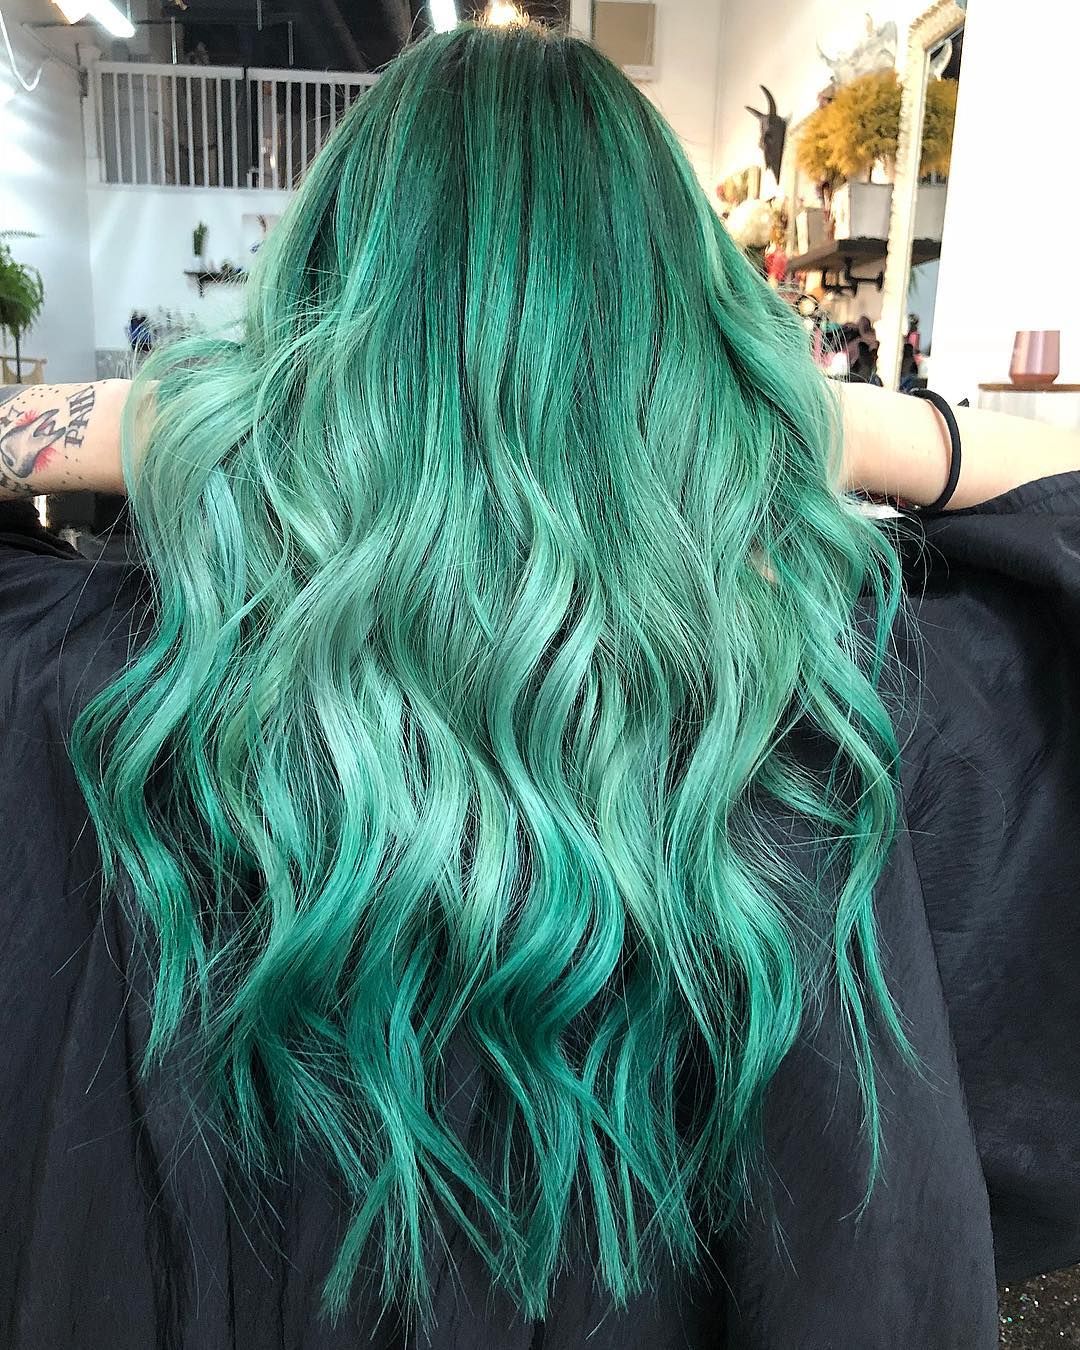 I want to change my hair colour to blonde brown hair but is it really  damaging to remove my current blue green hair color? I did my current hair  last dec 28.